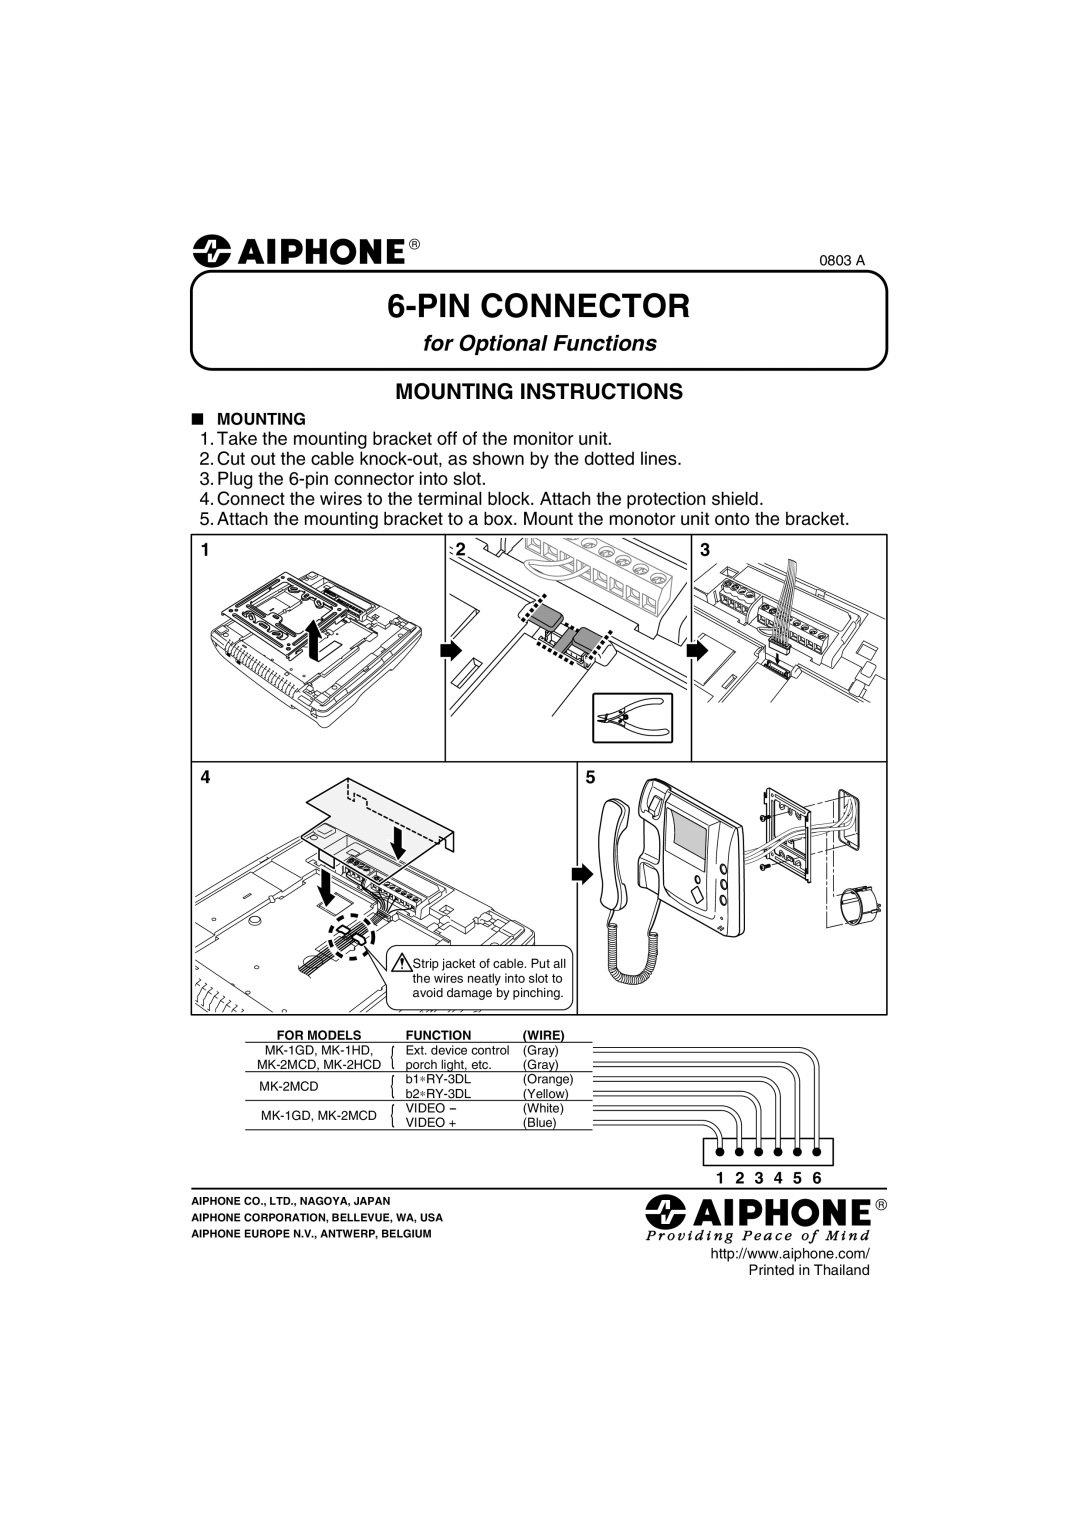 Aiphone MK-2HCD, Mk-2mcd manual Pinconnector, for Optional Functions, Mounting Instructions 